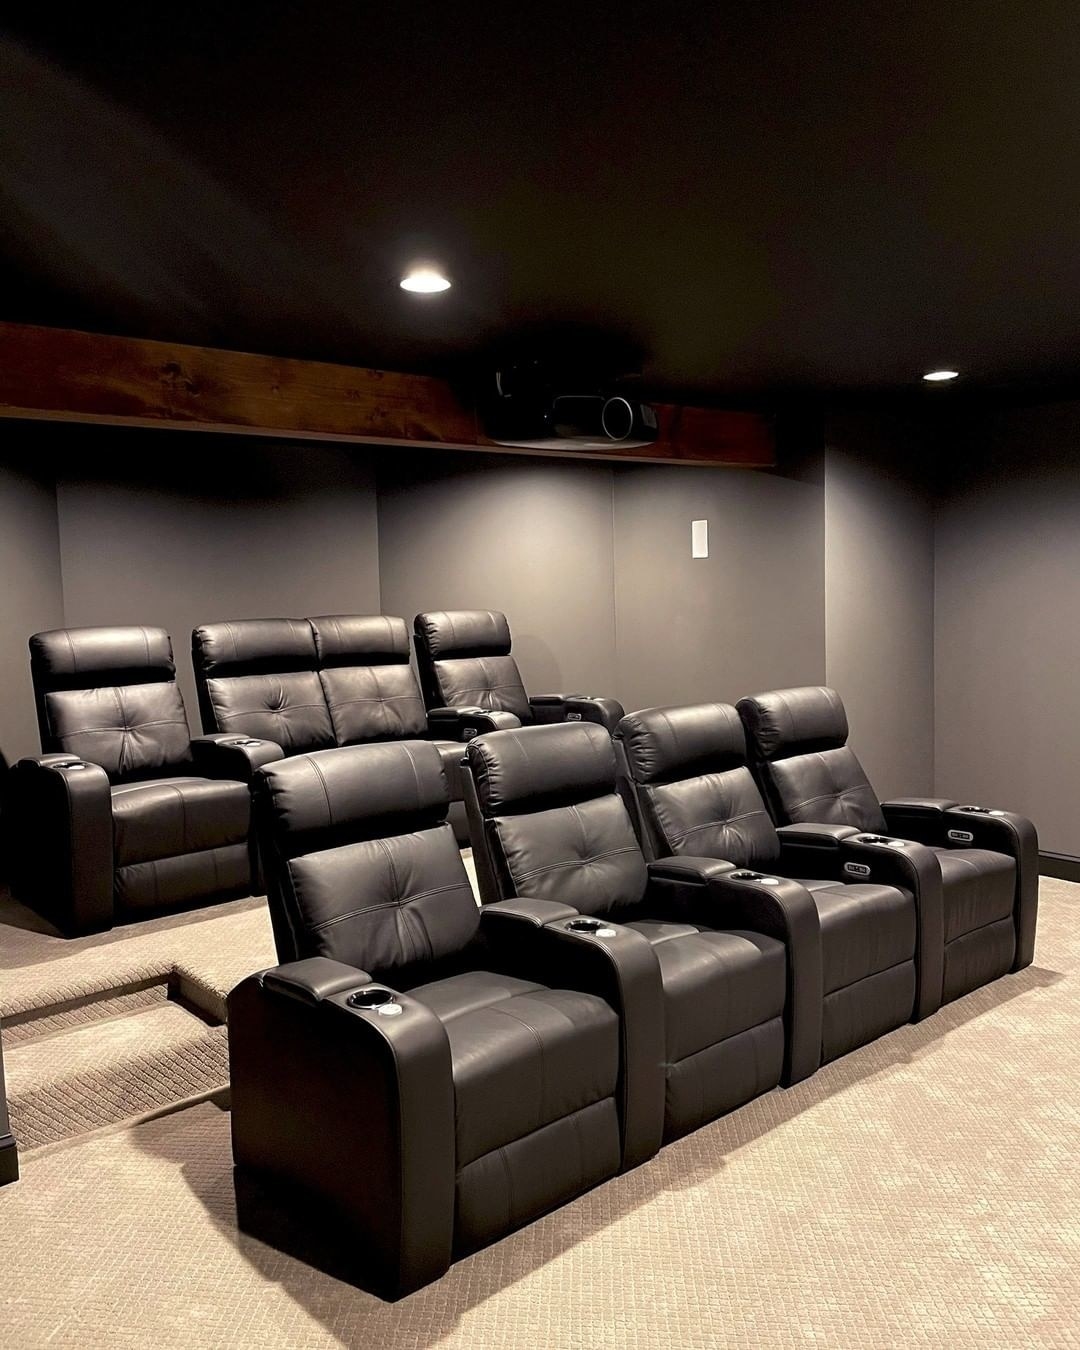 The chairs in a home theatre